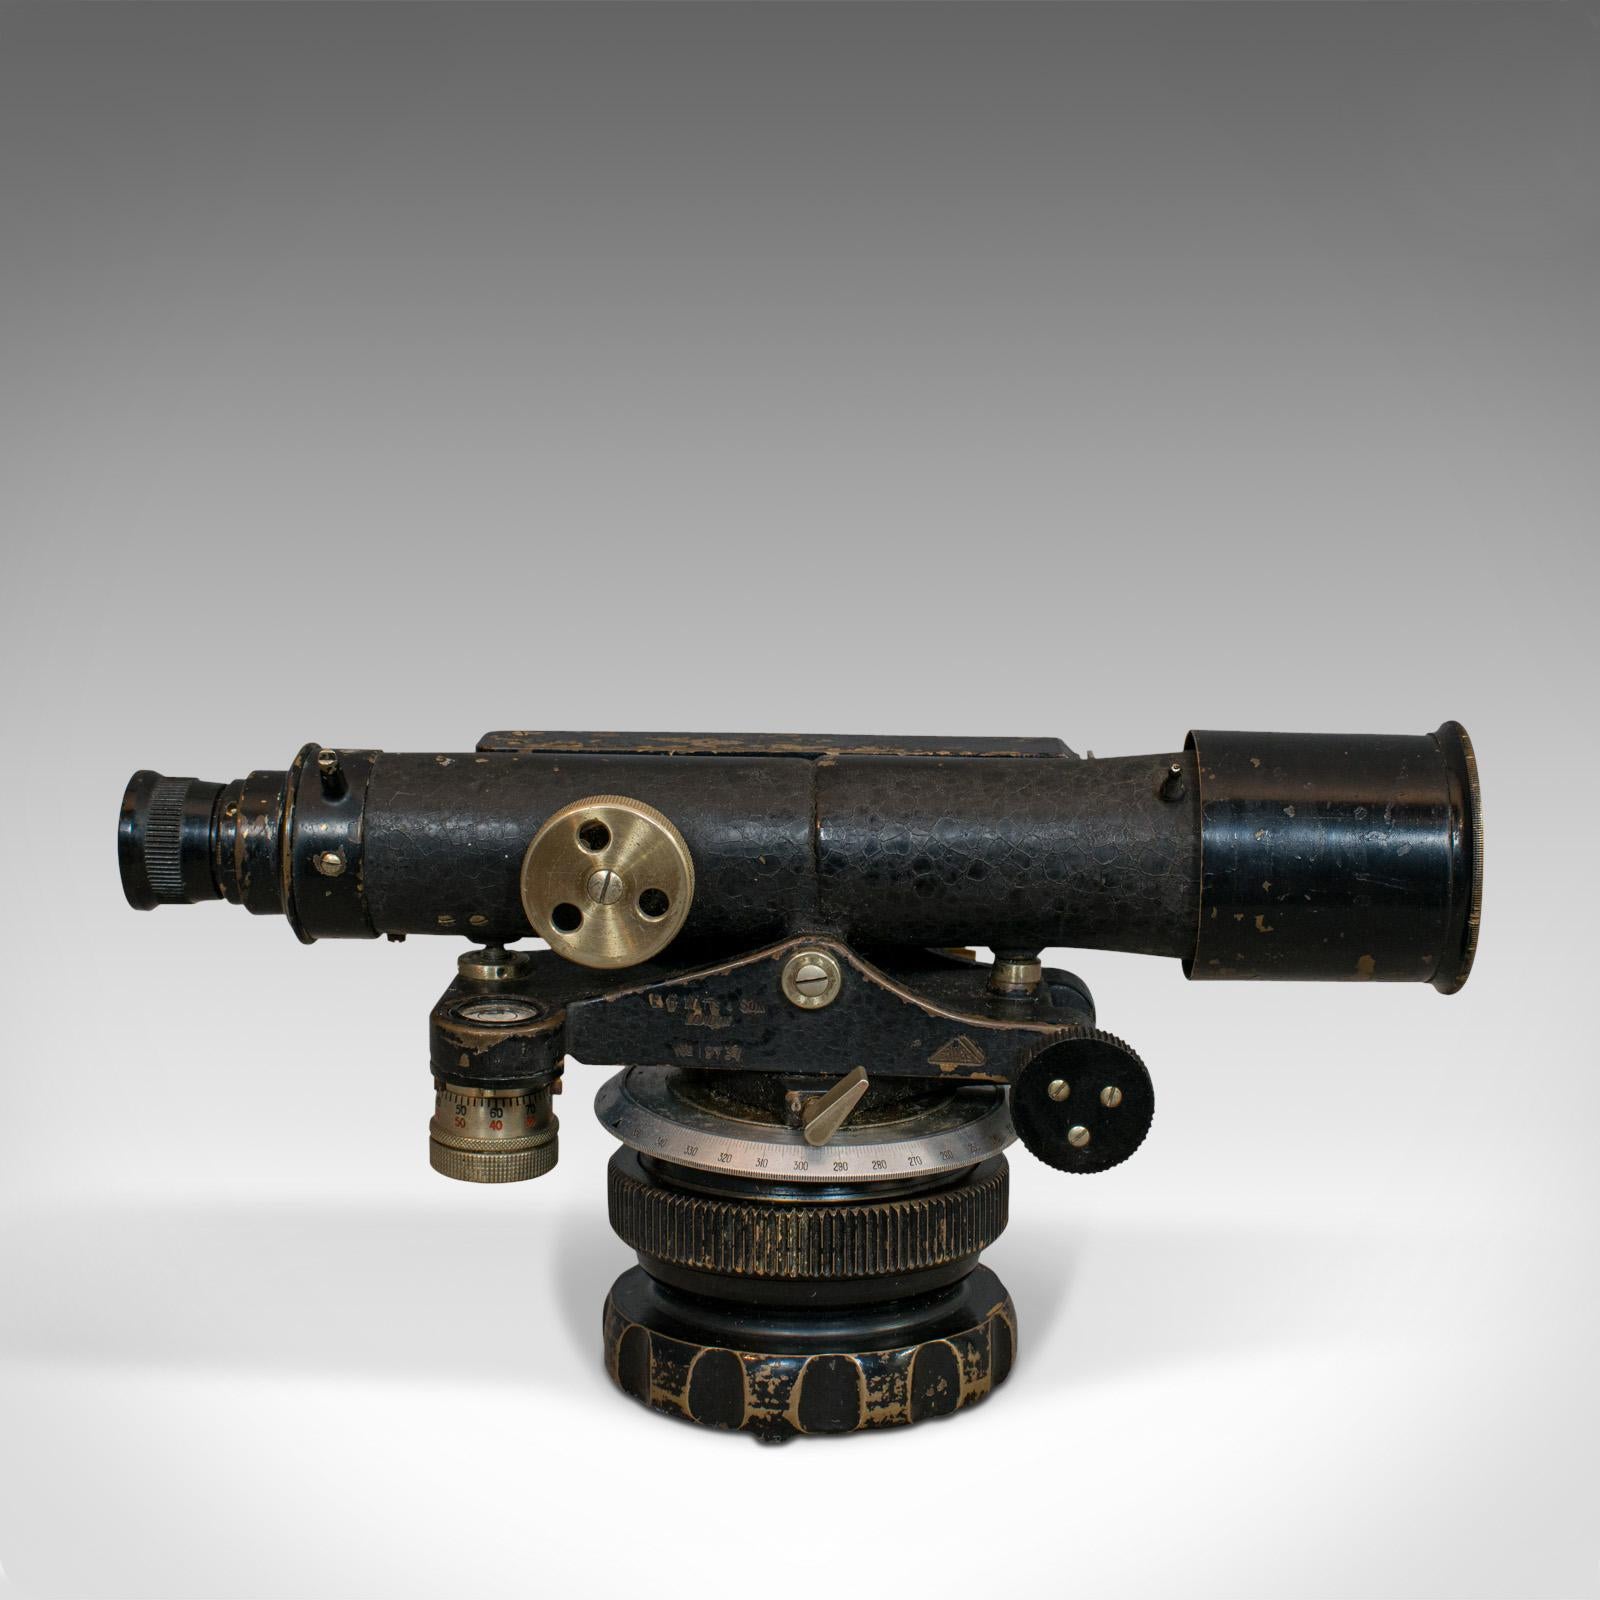 This is a vintage surveyor's level. An English, brass and alloy theodolite, perfect as desk ornament by E.R. Watts of London, dating to the mid-20th century, circa 1940.

Charming, vintage scientific instrument, pleasingly heavy at 2.75kg (6.06